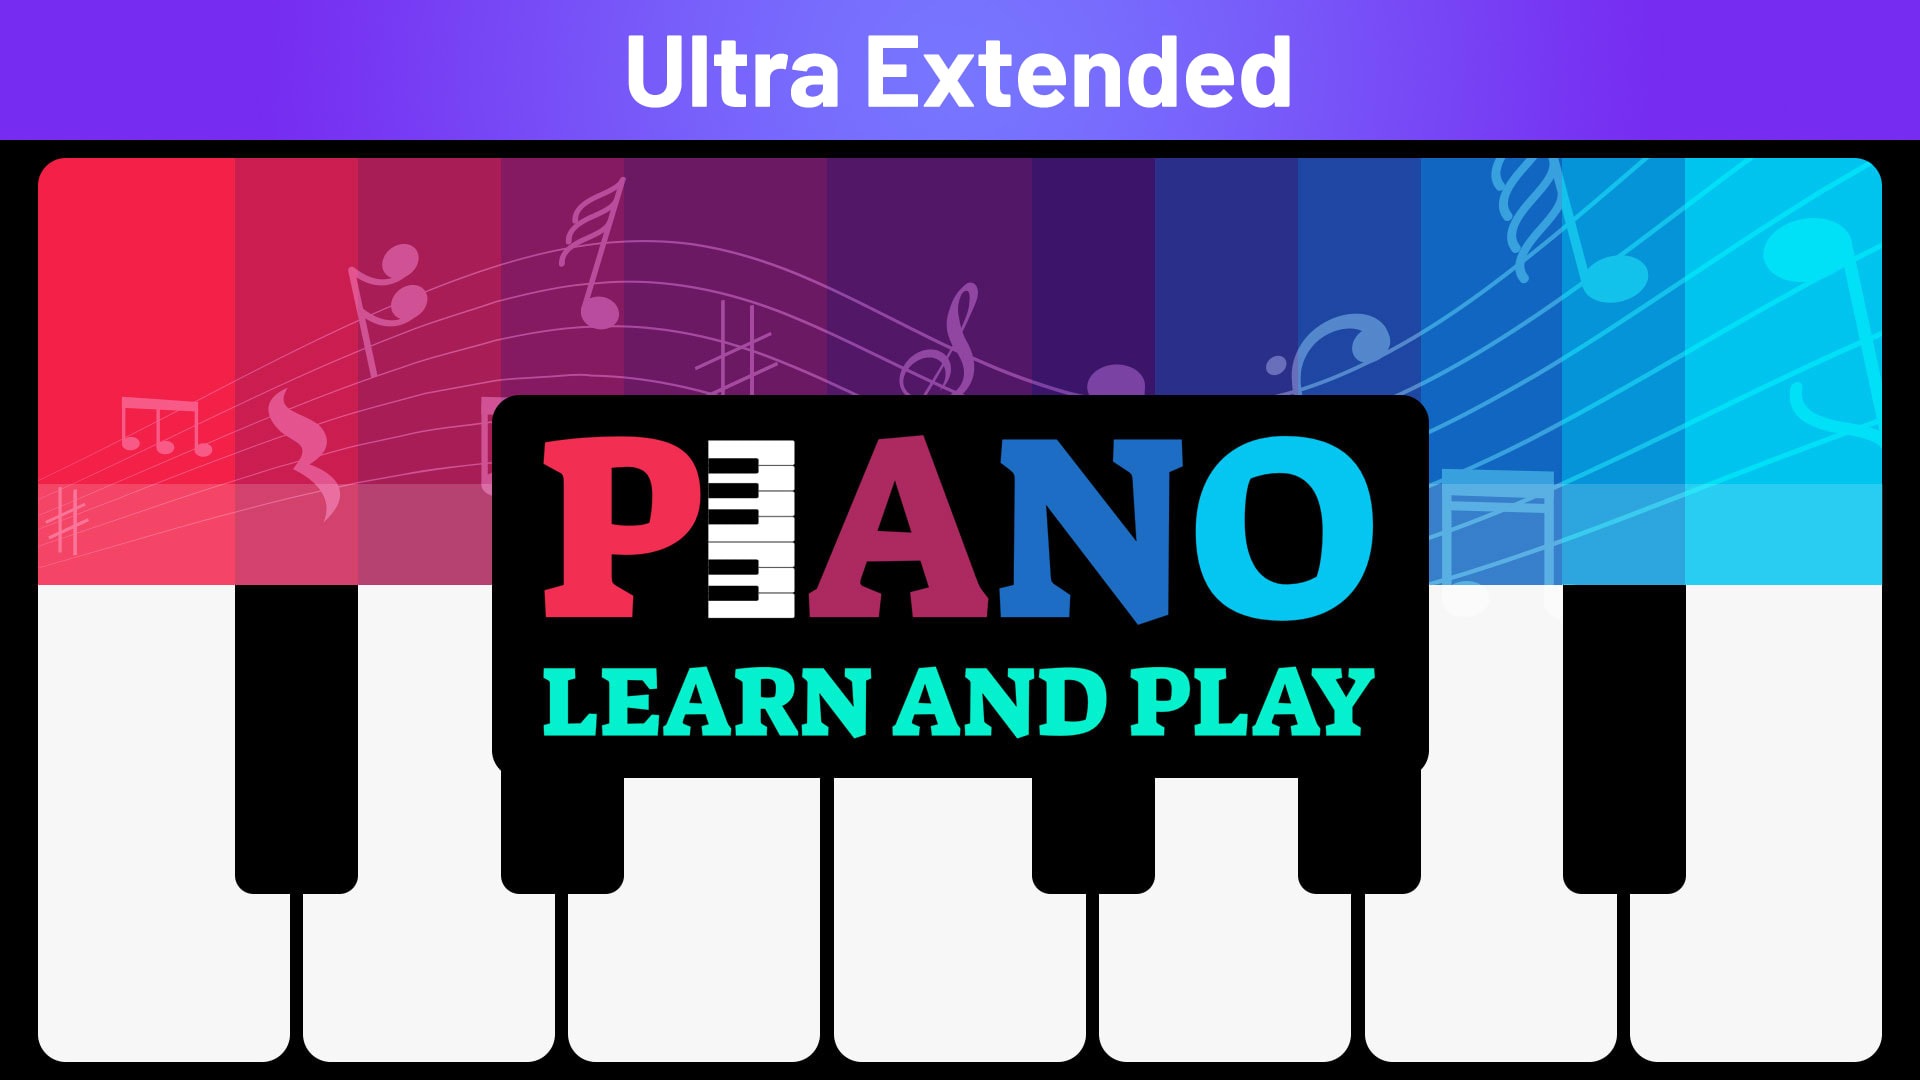 Piano: Learn and Play Ultra Extended